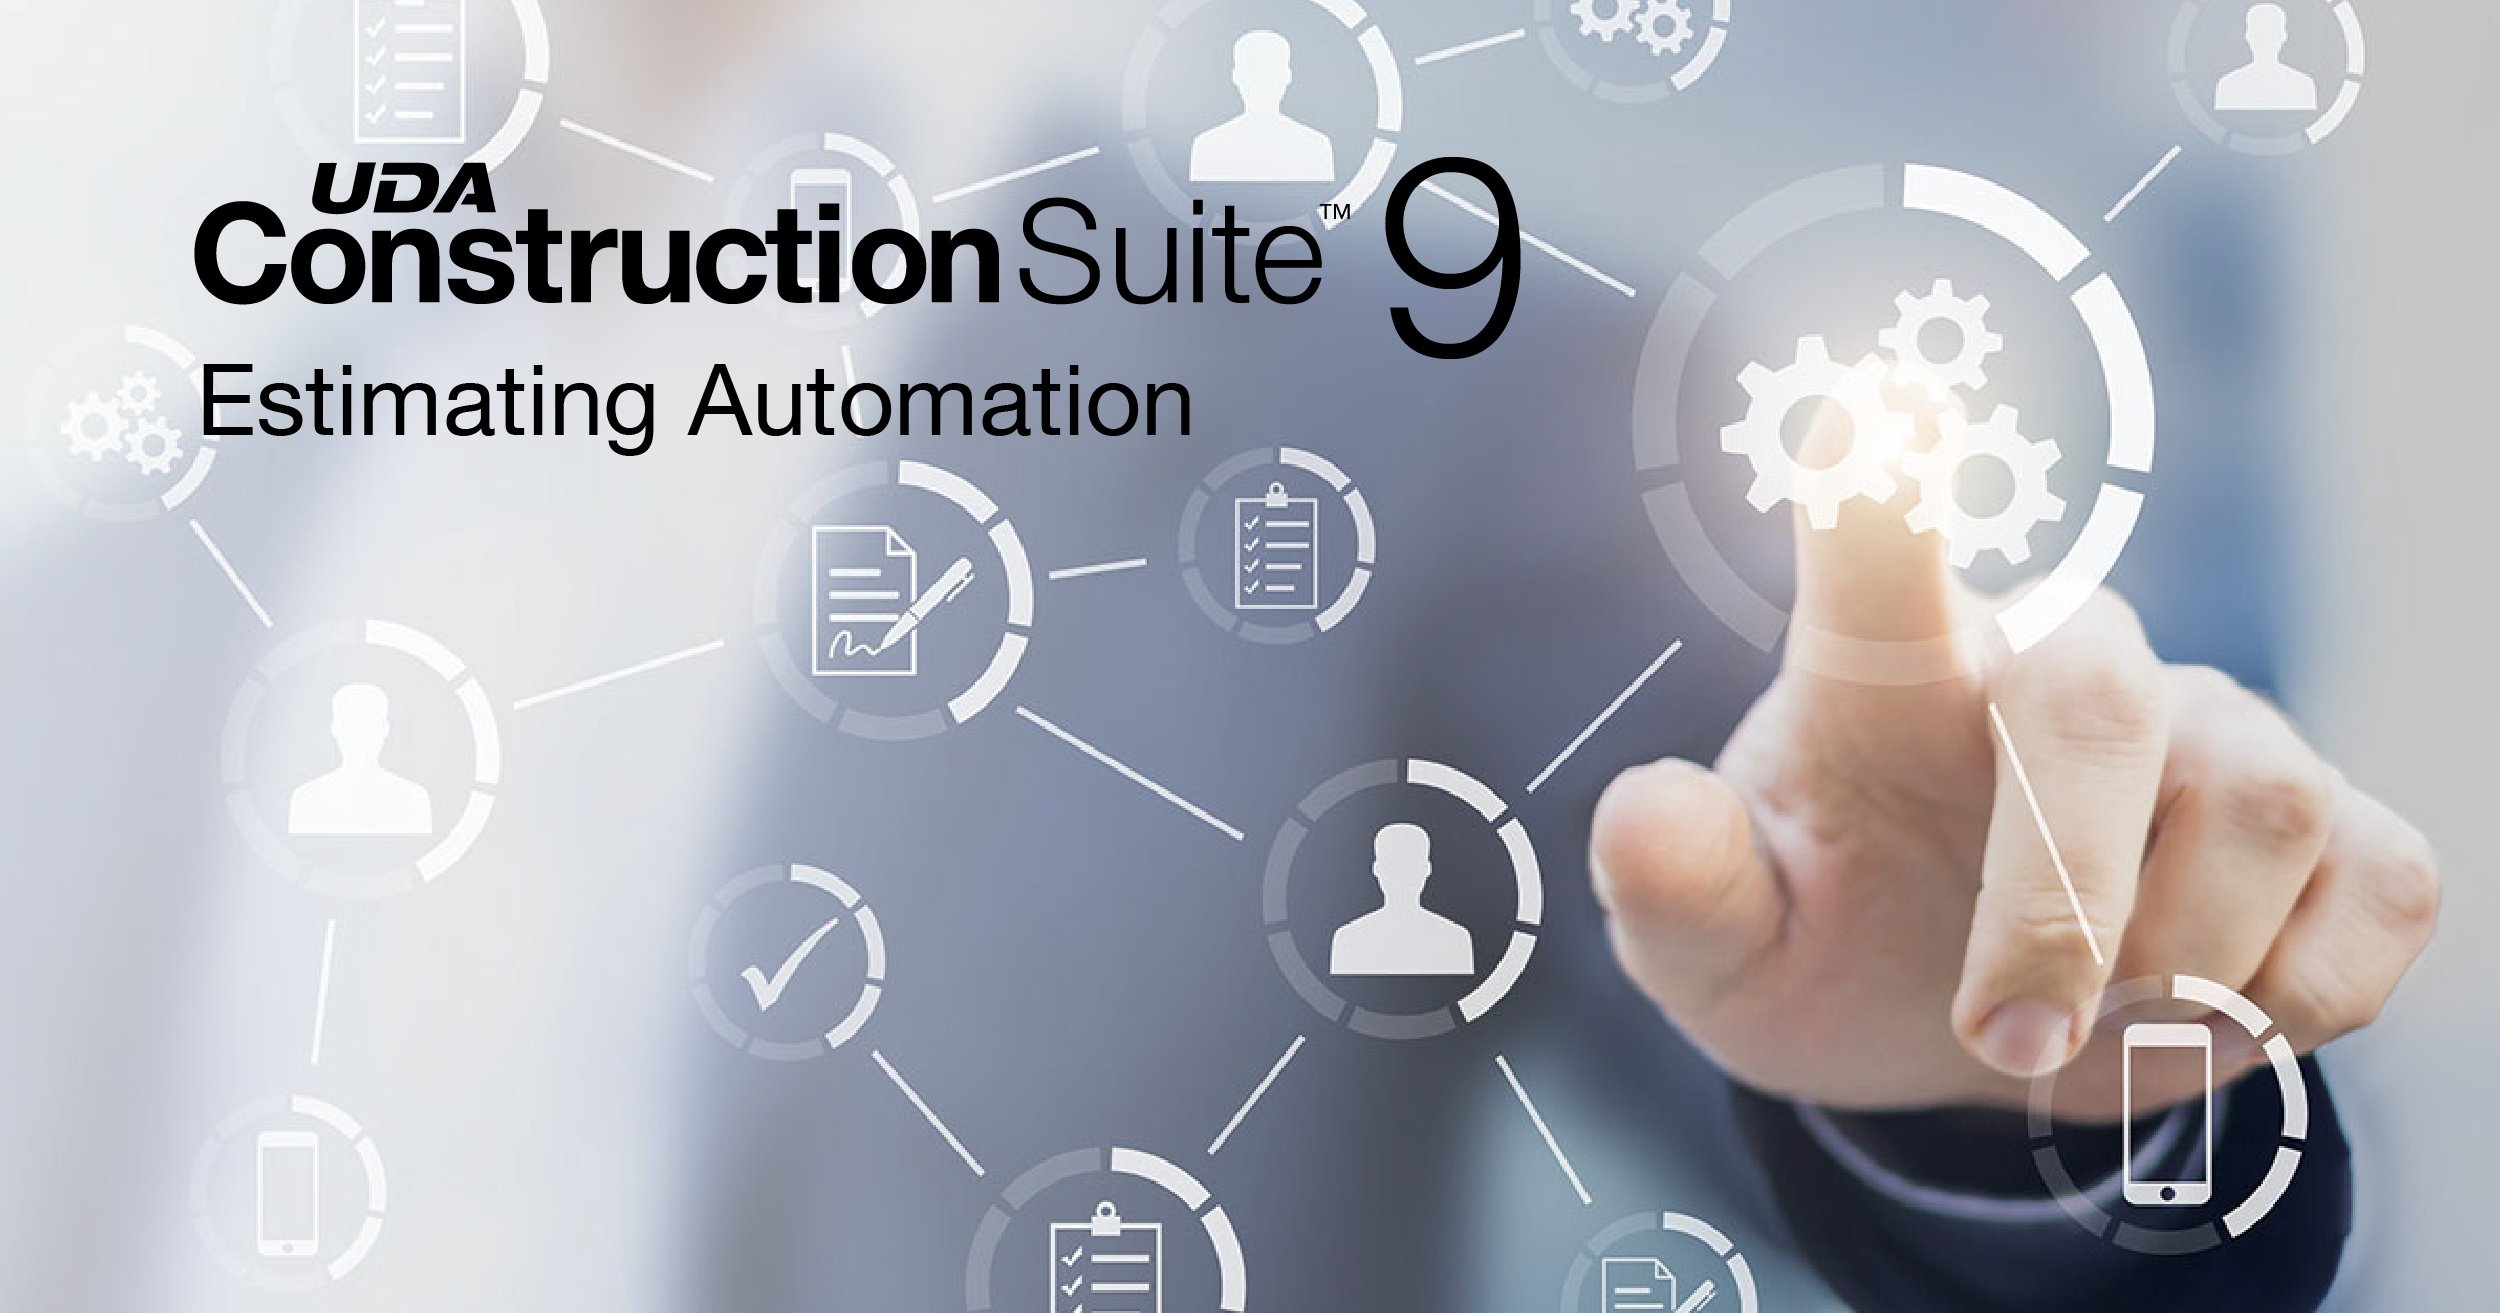 ConstructionSuite 9 Provides Improved Efficiency with Estimating Automation